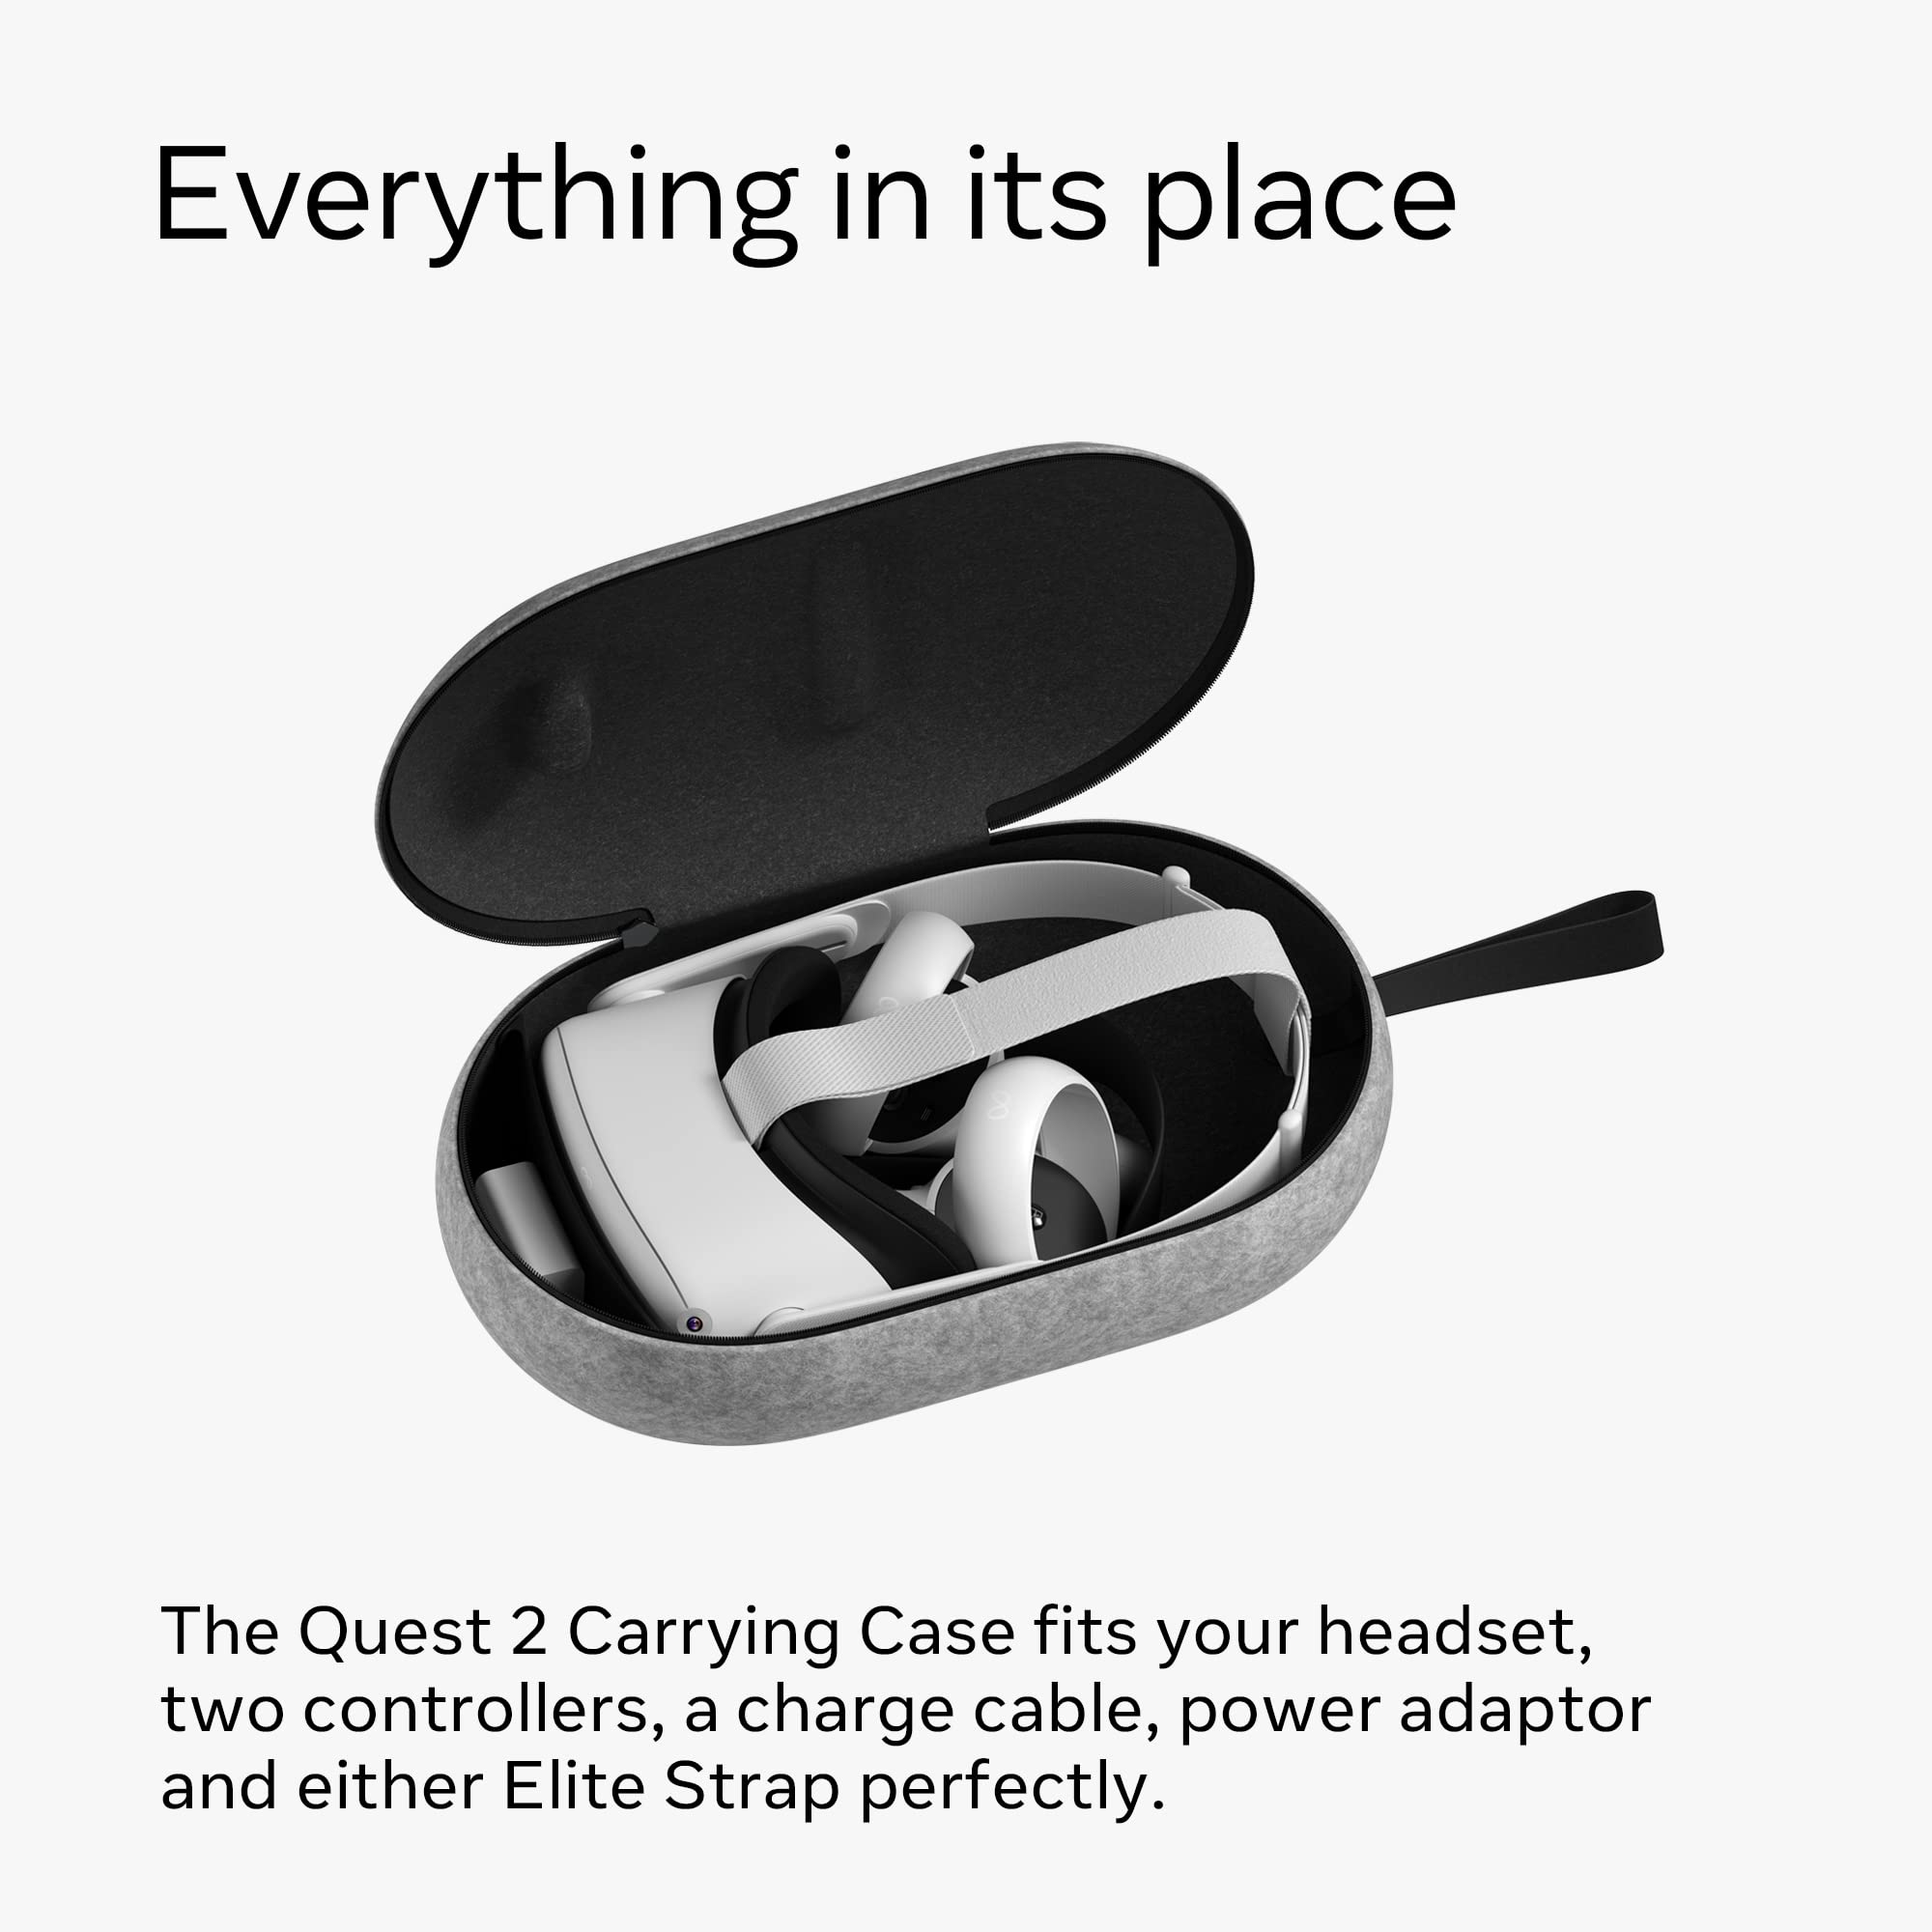 Quest 2 Carrying Case for Lightweight, Portable Protection - VR